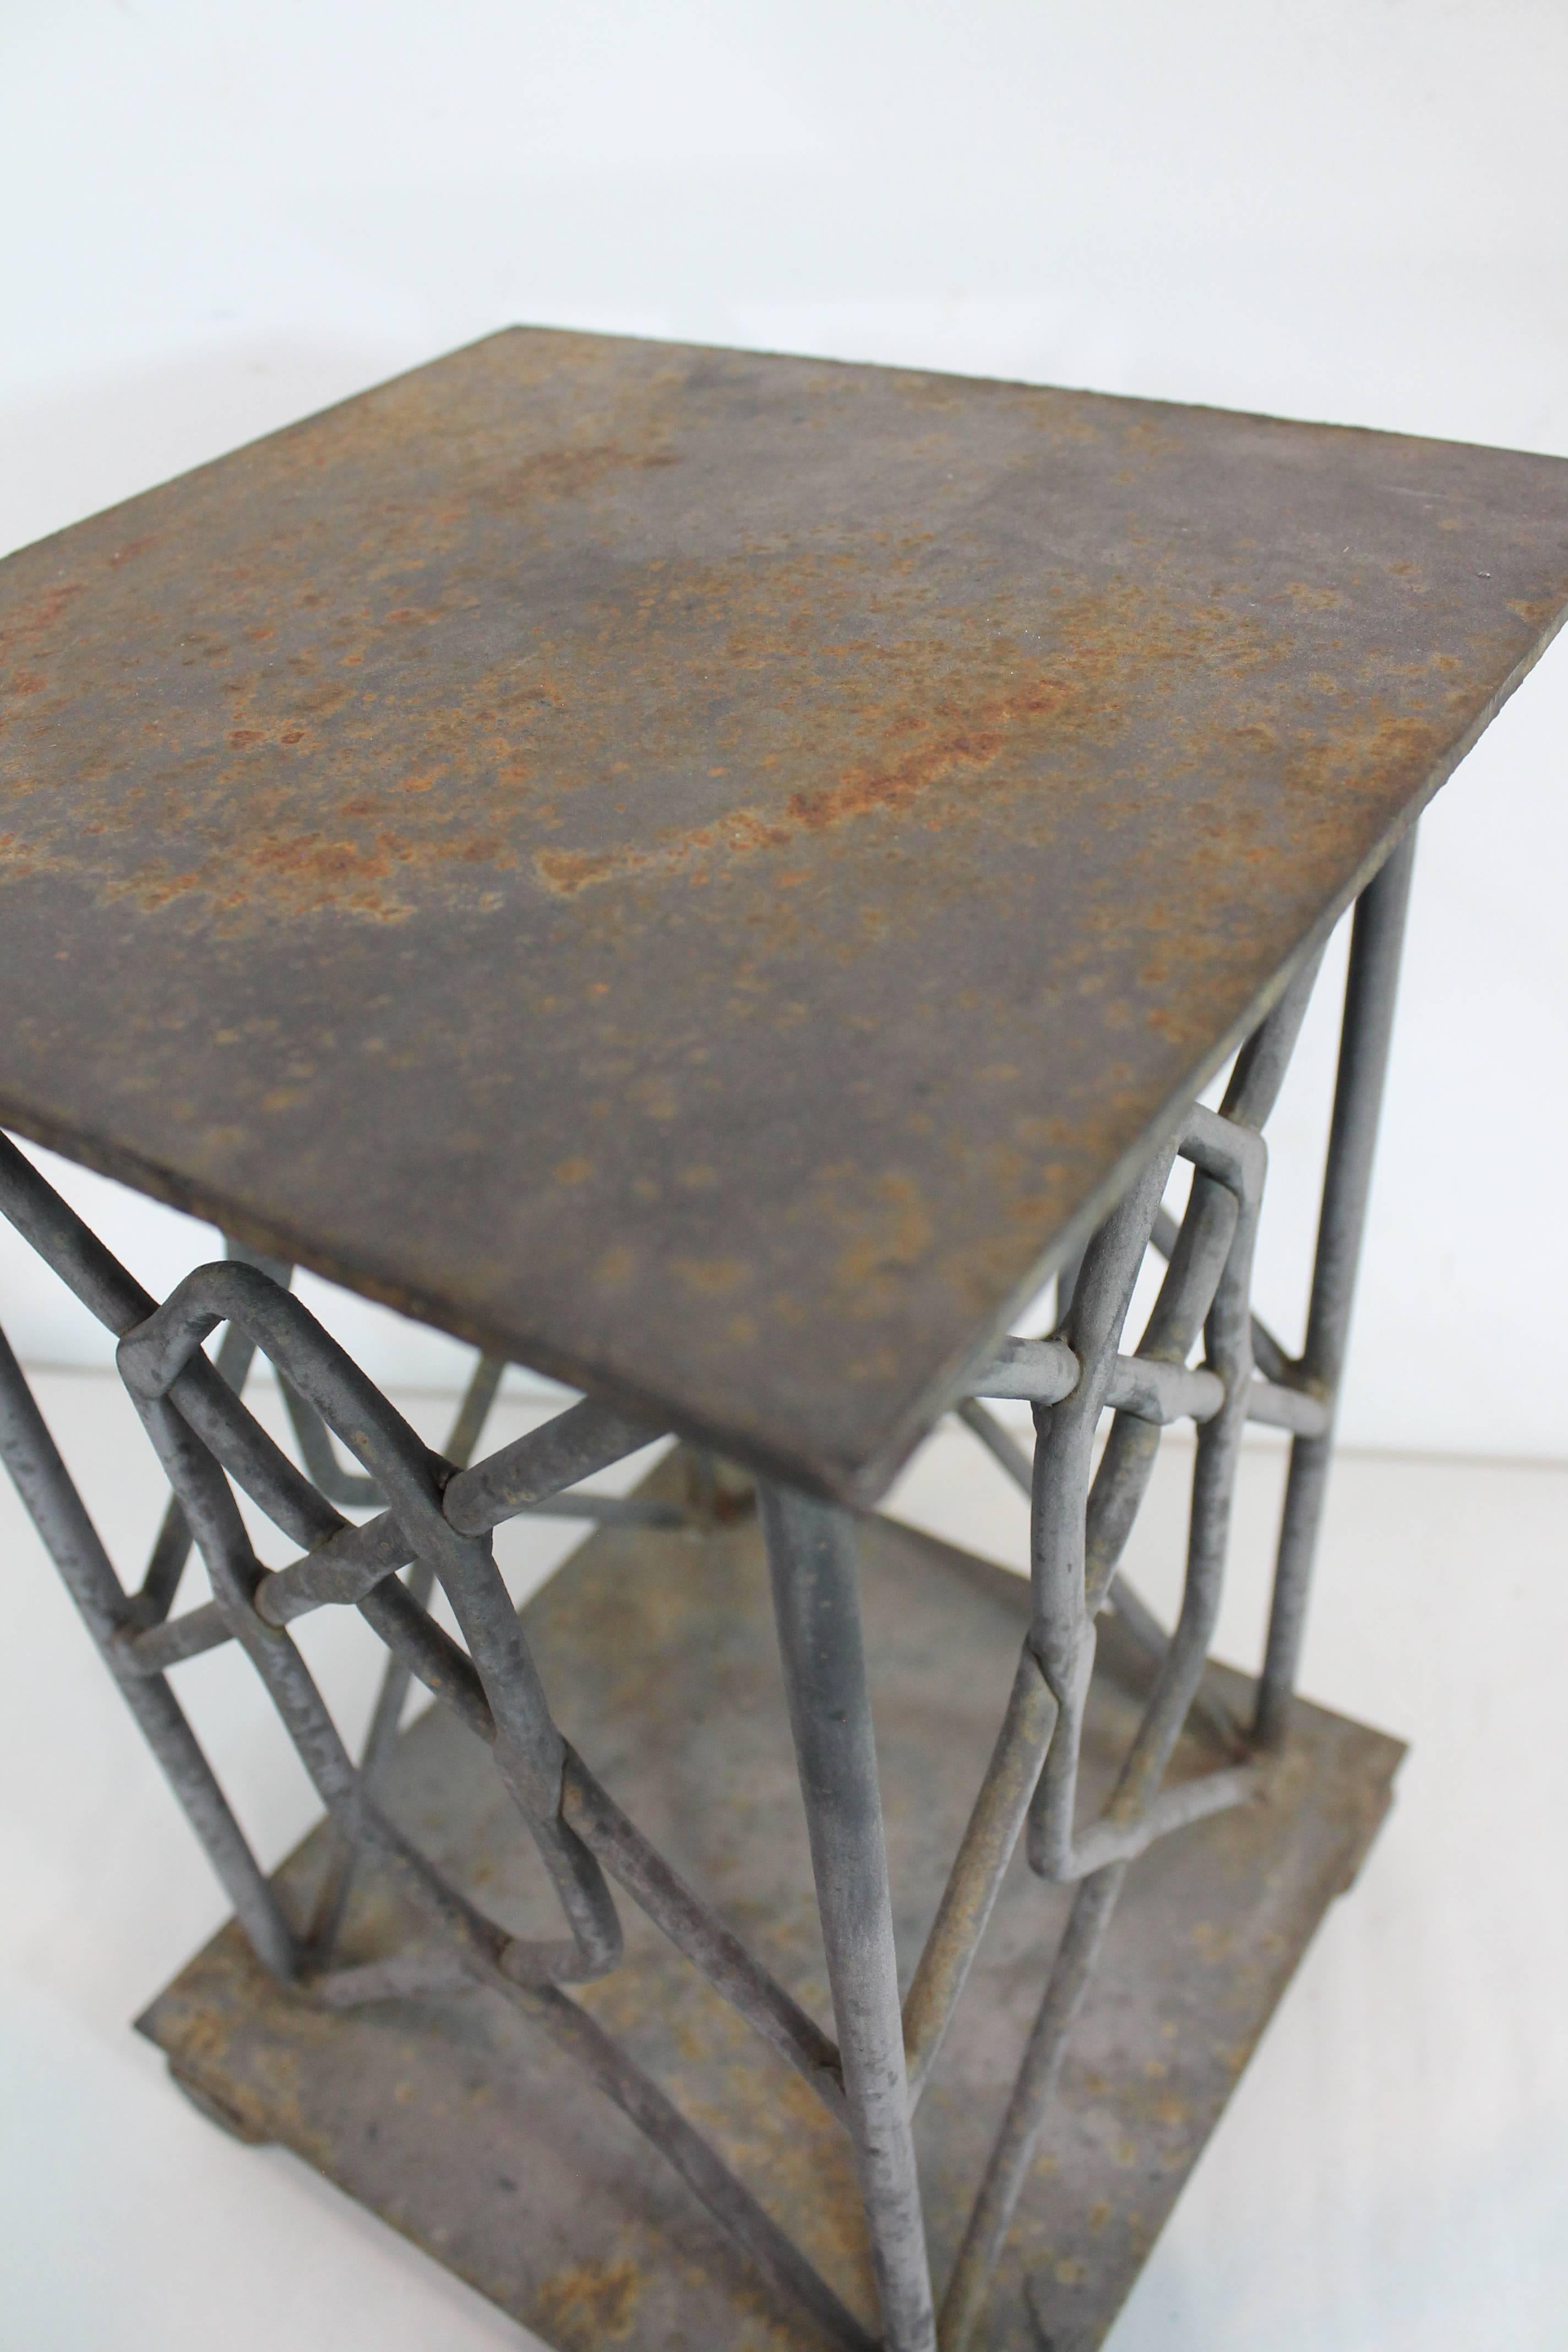 Sculptural Hand-Wrought Iron Side Table In Excellent Condition For Sale In 3 Oaks, MI